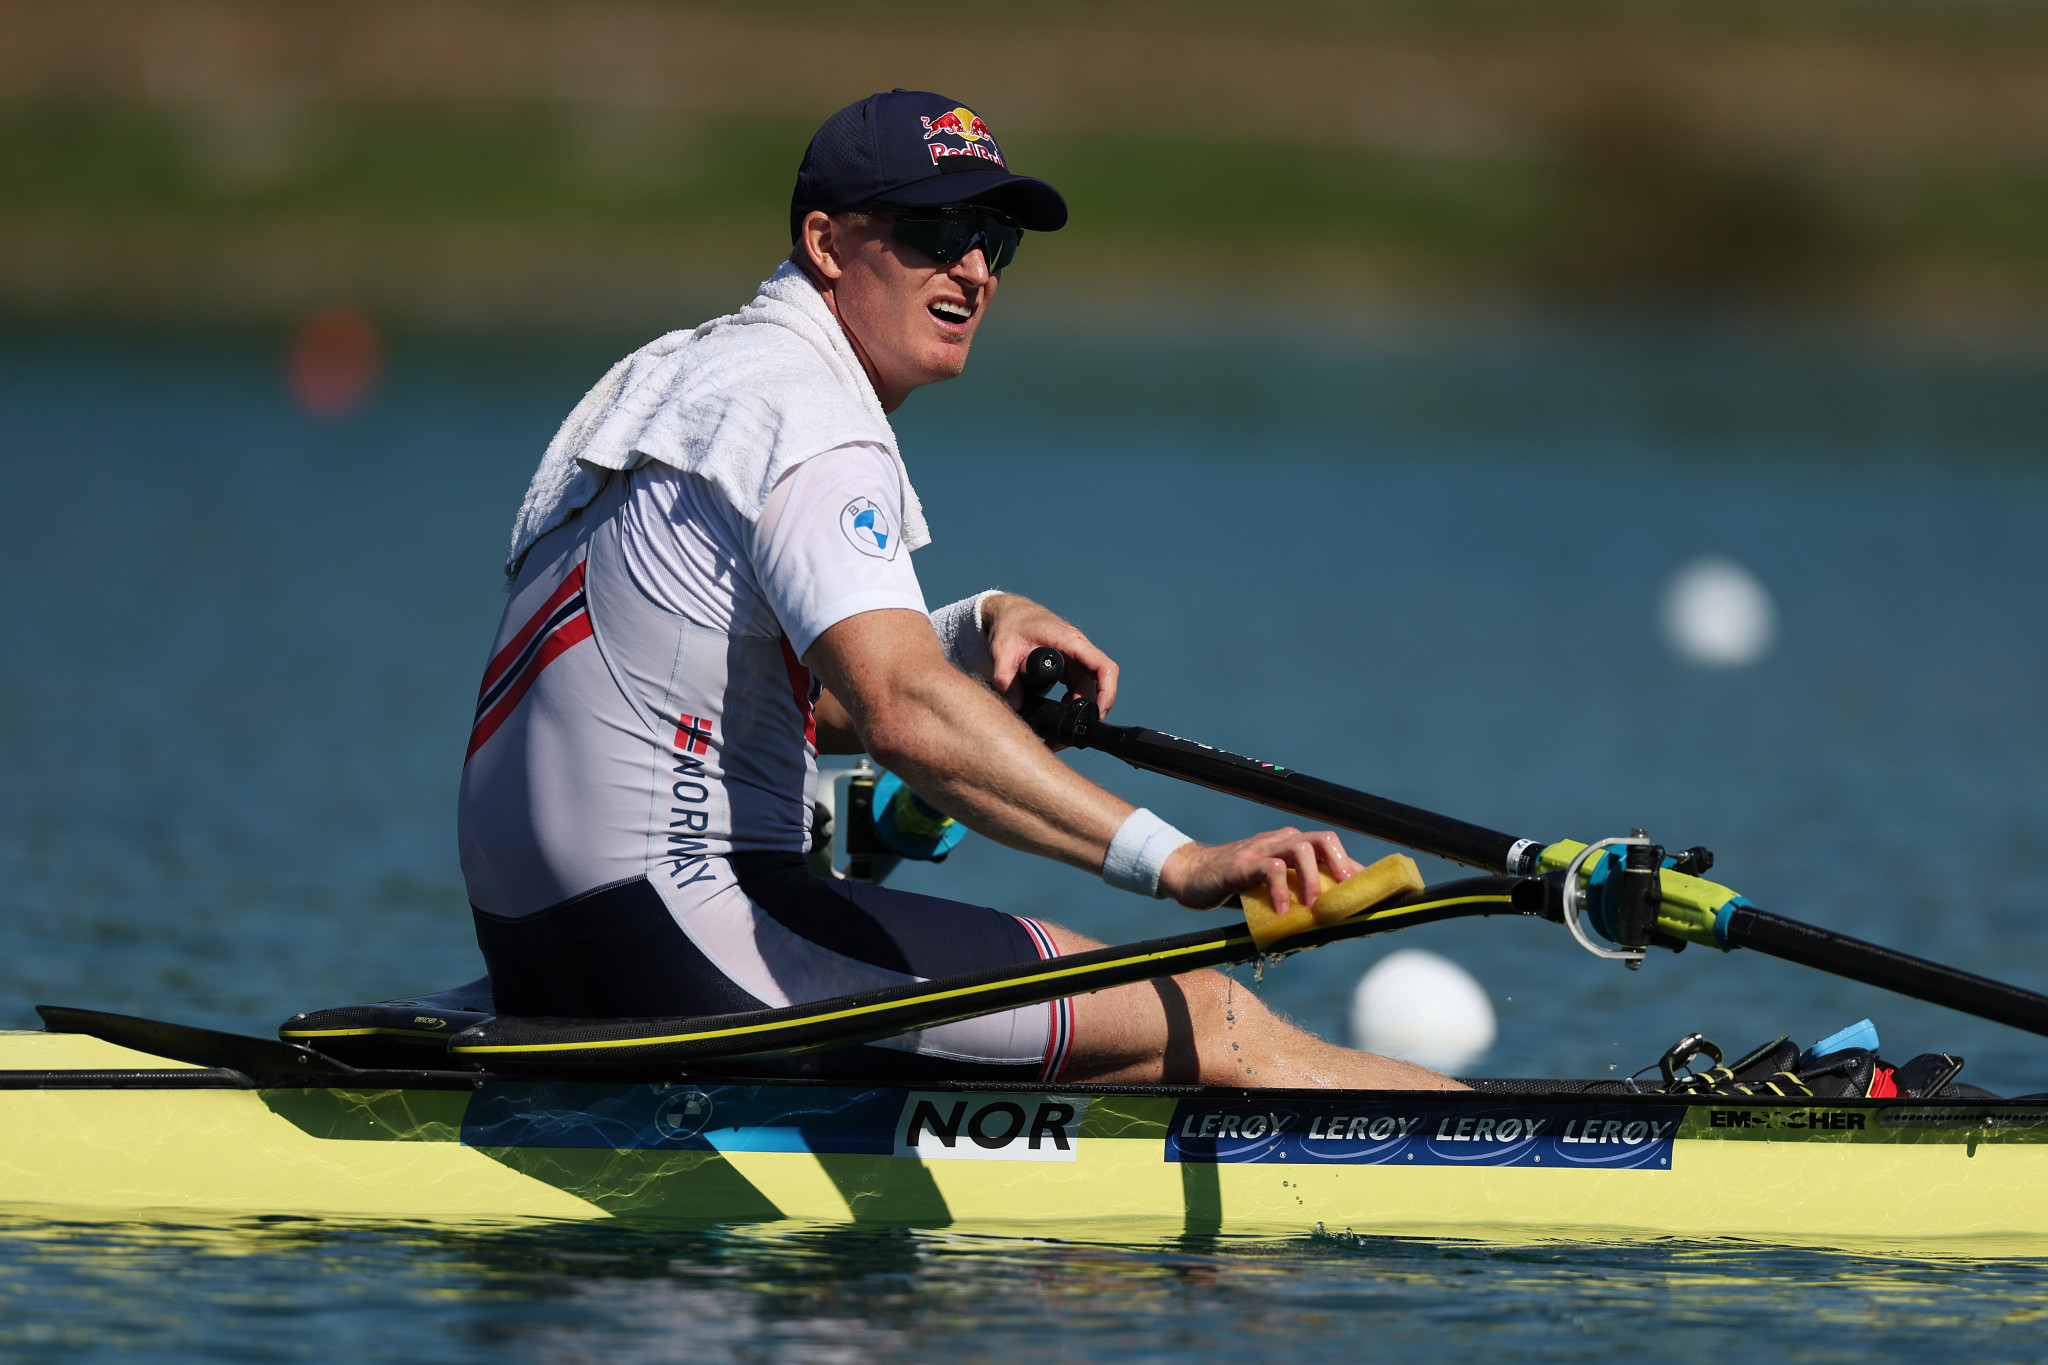 Tokyo 2020 rowing silver medallist Kjetil Borch has claimed that Norwegian IOC member Astrid Uhrenholdt Jacobsen never consulted with the country's athletes before making a statement supporting the participation of Russia and Belarus at Paris 2024 ©Getty Images